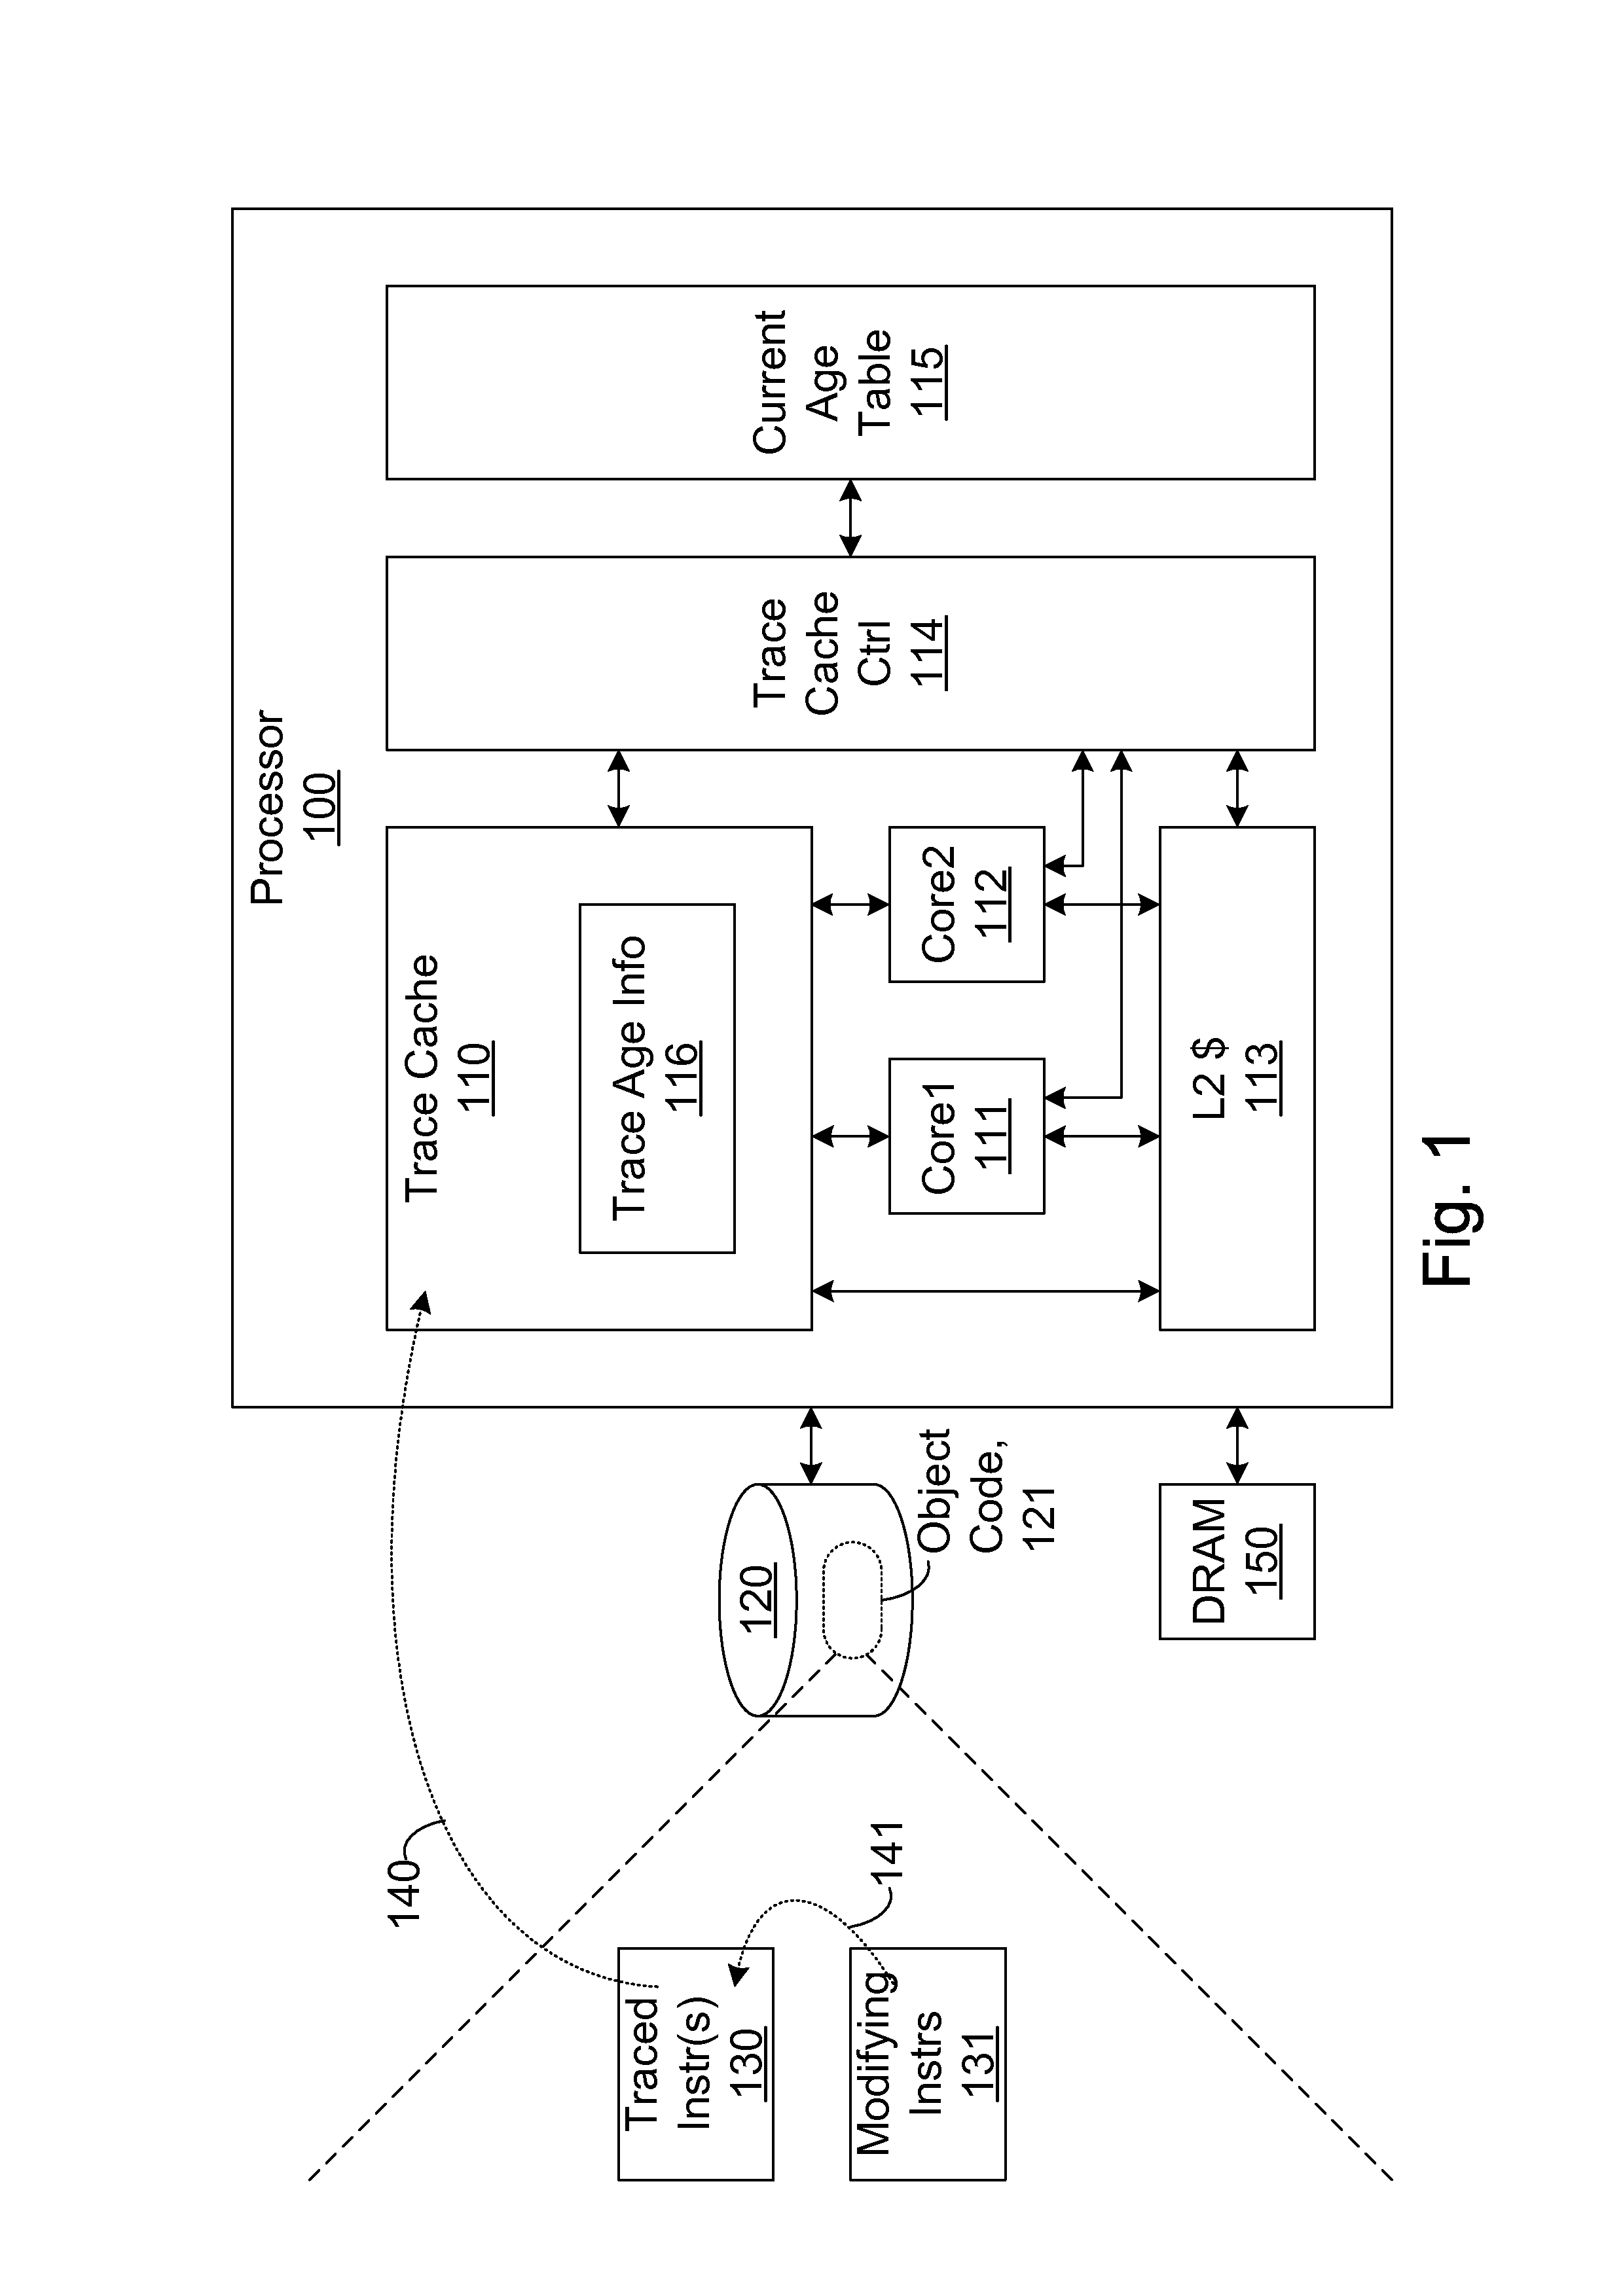 Trace cache for efficient self-modifying code processing